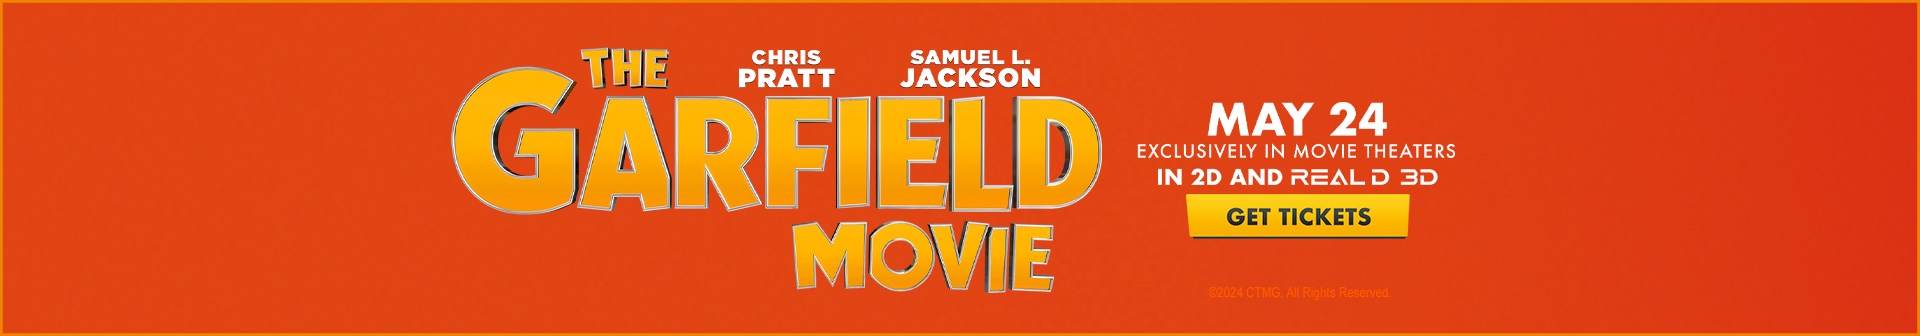 The Garfield Movie, only in theatres May 24. Get tickets.